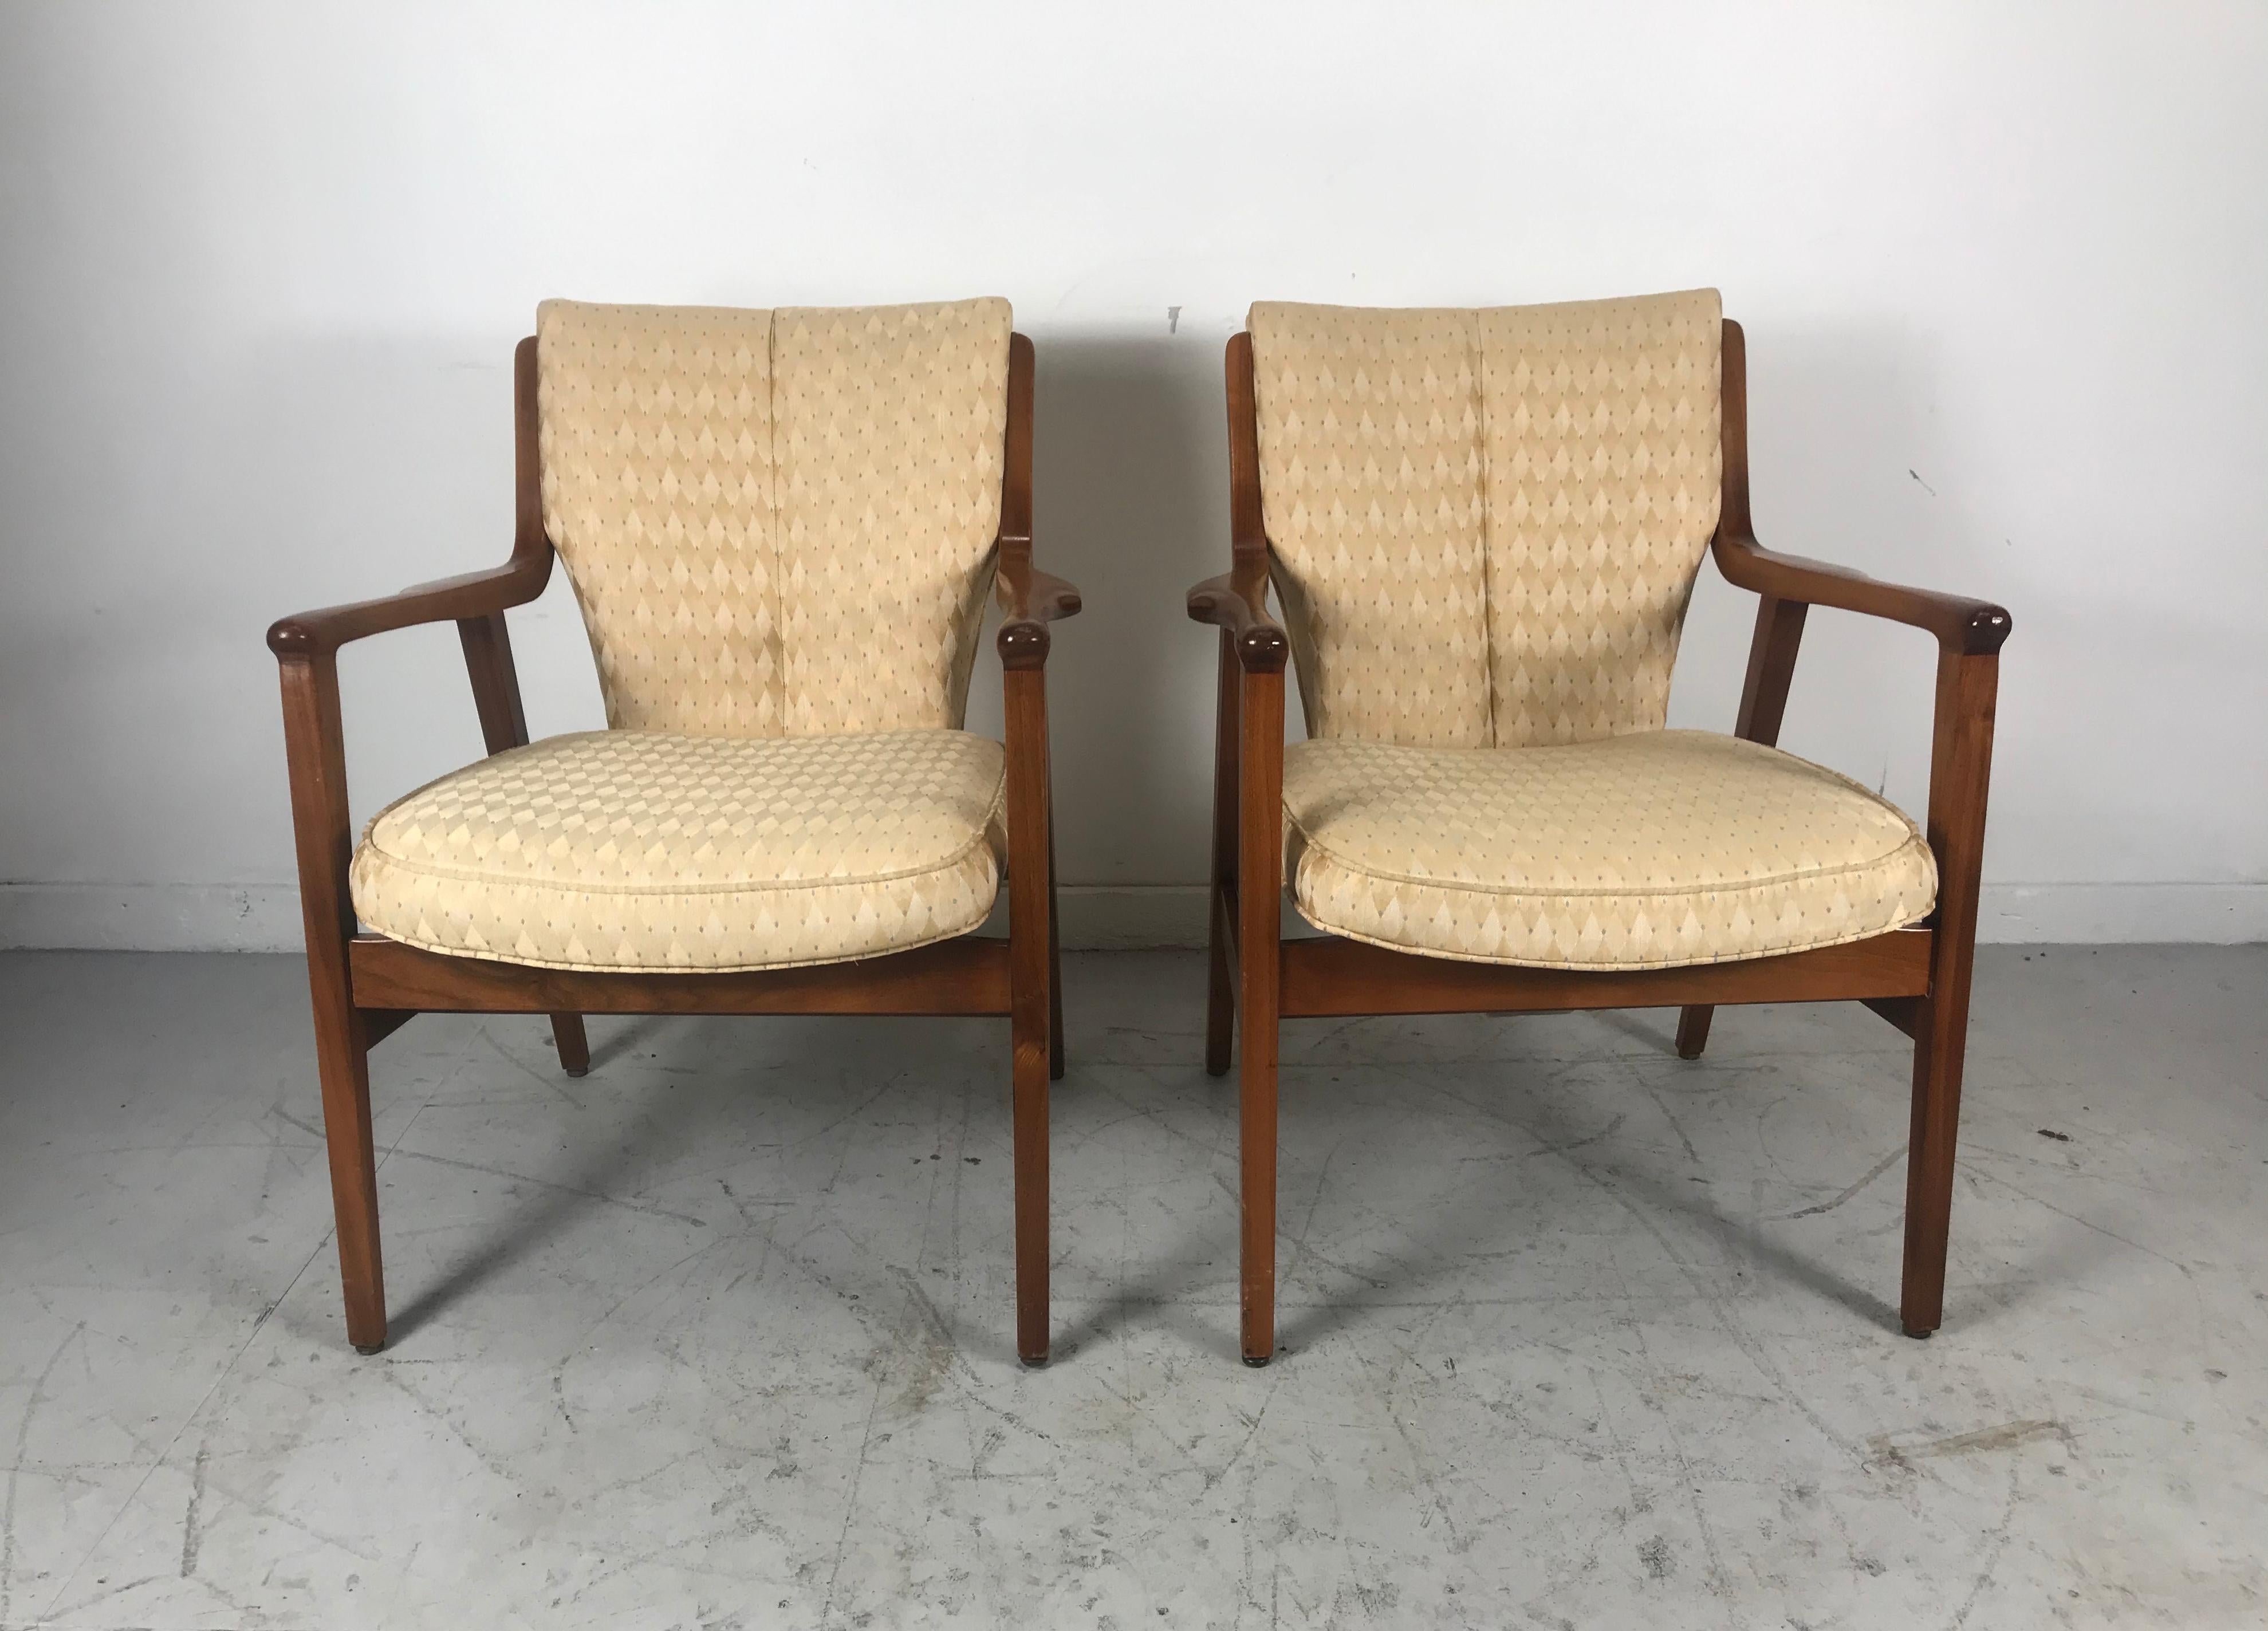 Stunning pair of Modernist lounge chairs by Gunlocke, manner of Finn Juhl, unusual split back design, Sculpted walnut frames recently reupholstered in a neutral tone harlequin pattern fabric. Extremely comfortable, solid, sturdy quality and